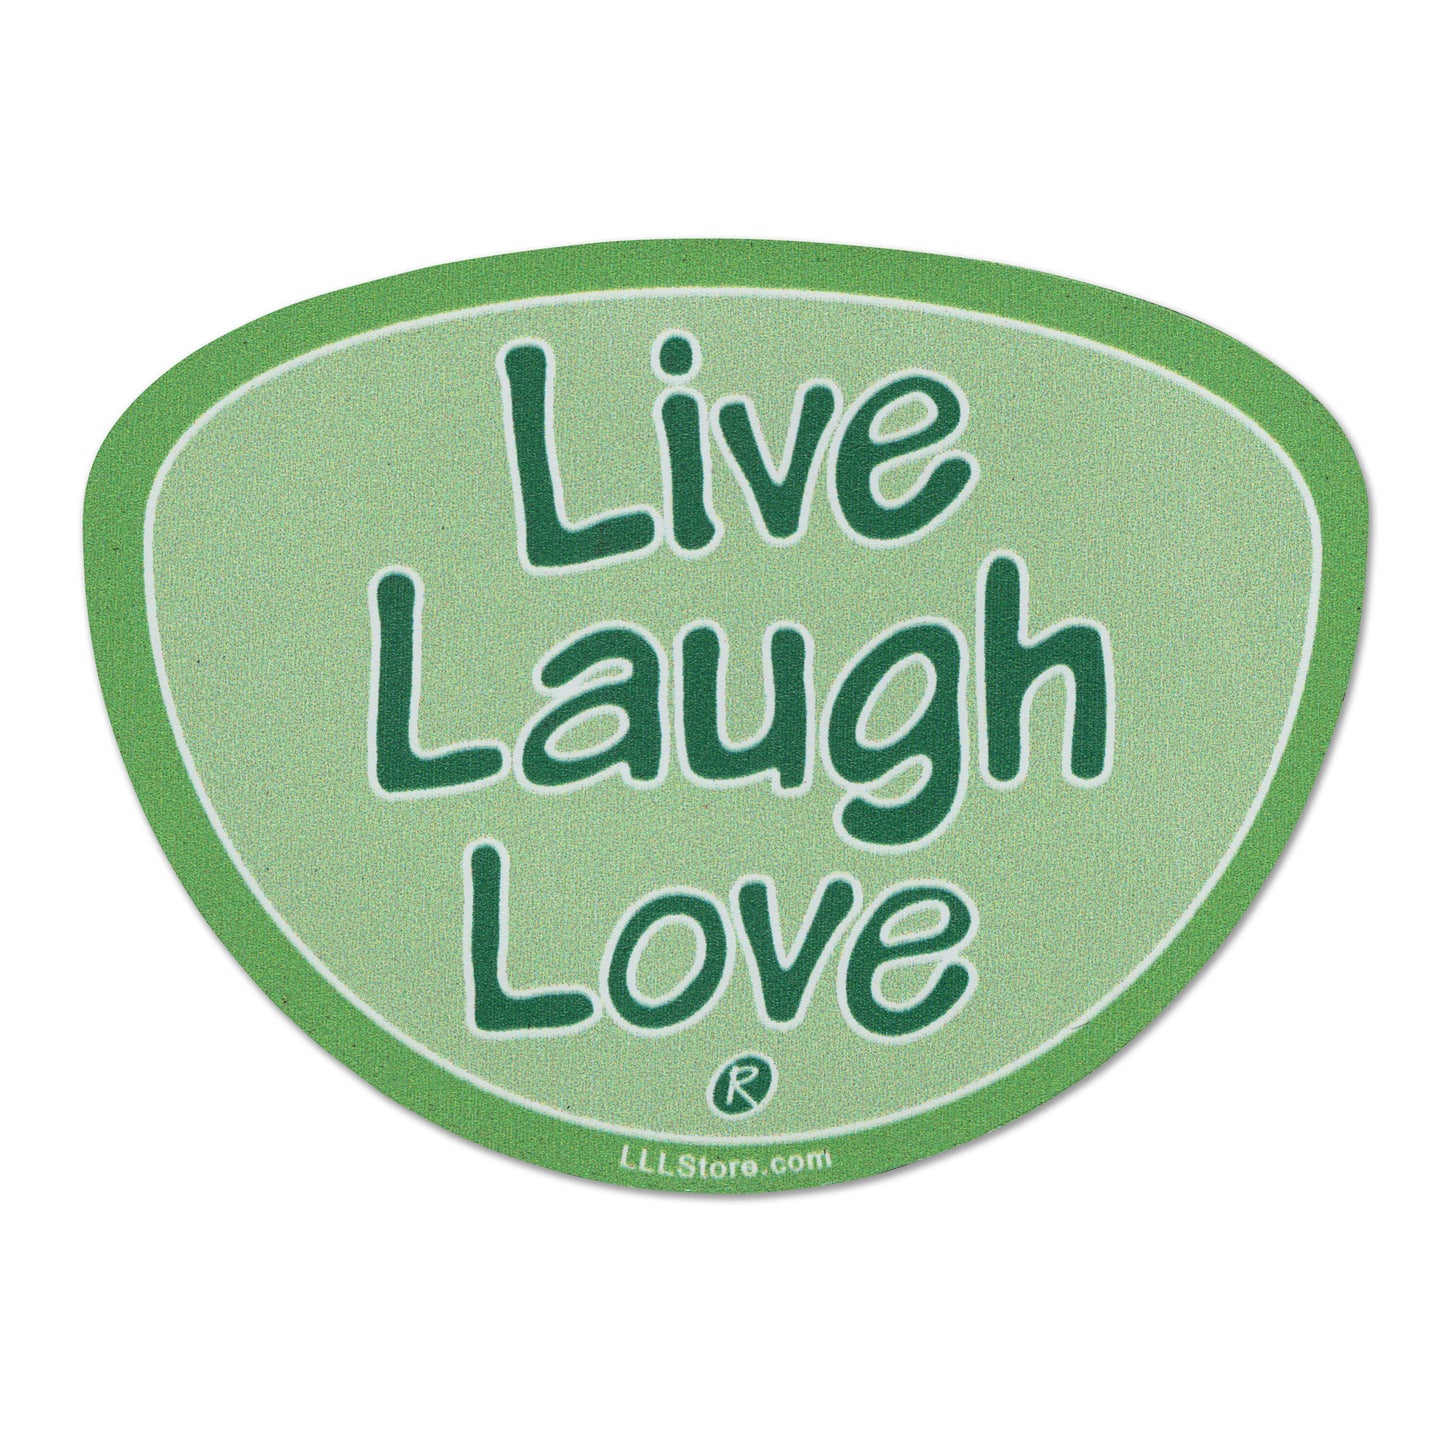 Live Laugh Love® Decorative Message Magnet - Green on Green